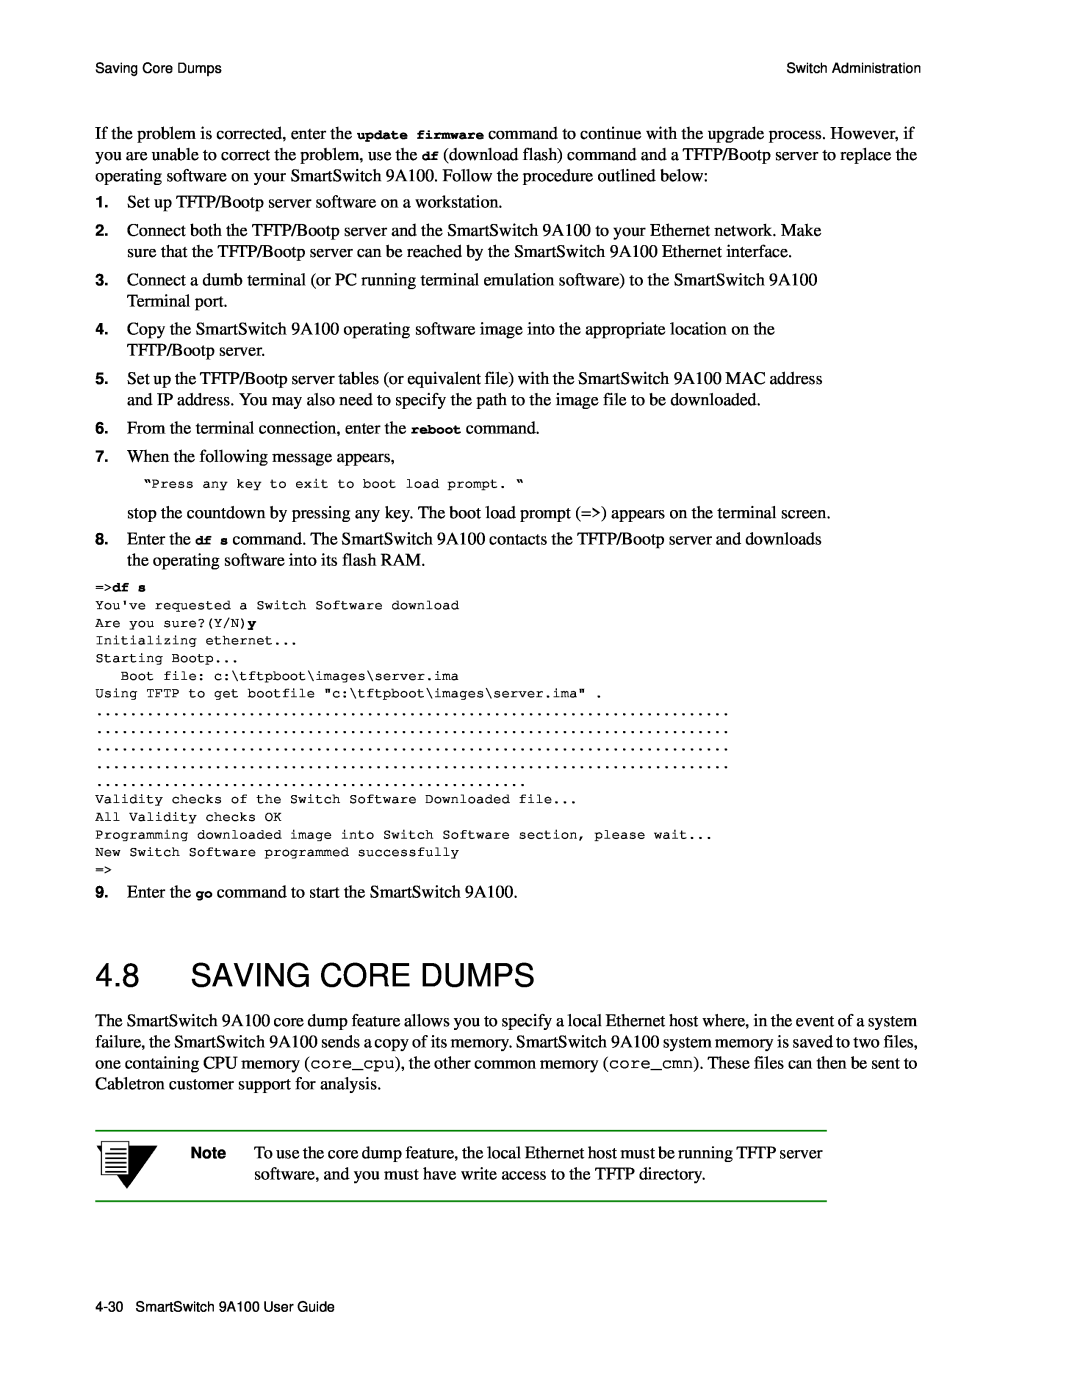 Cabletron Systems manual Saving Core Dumps, SmartSwitch 9A100 User Guide 